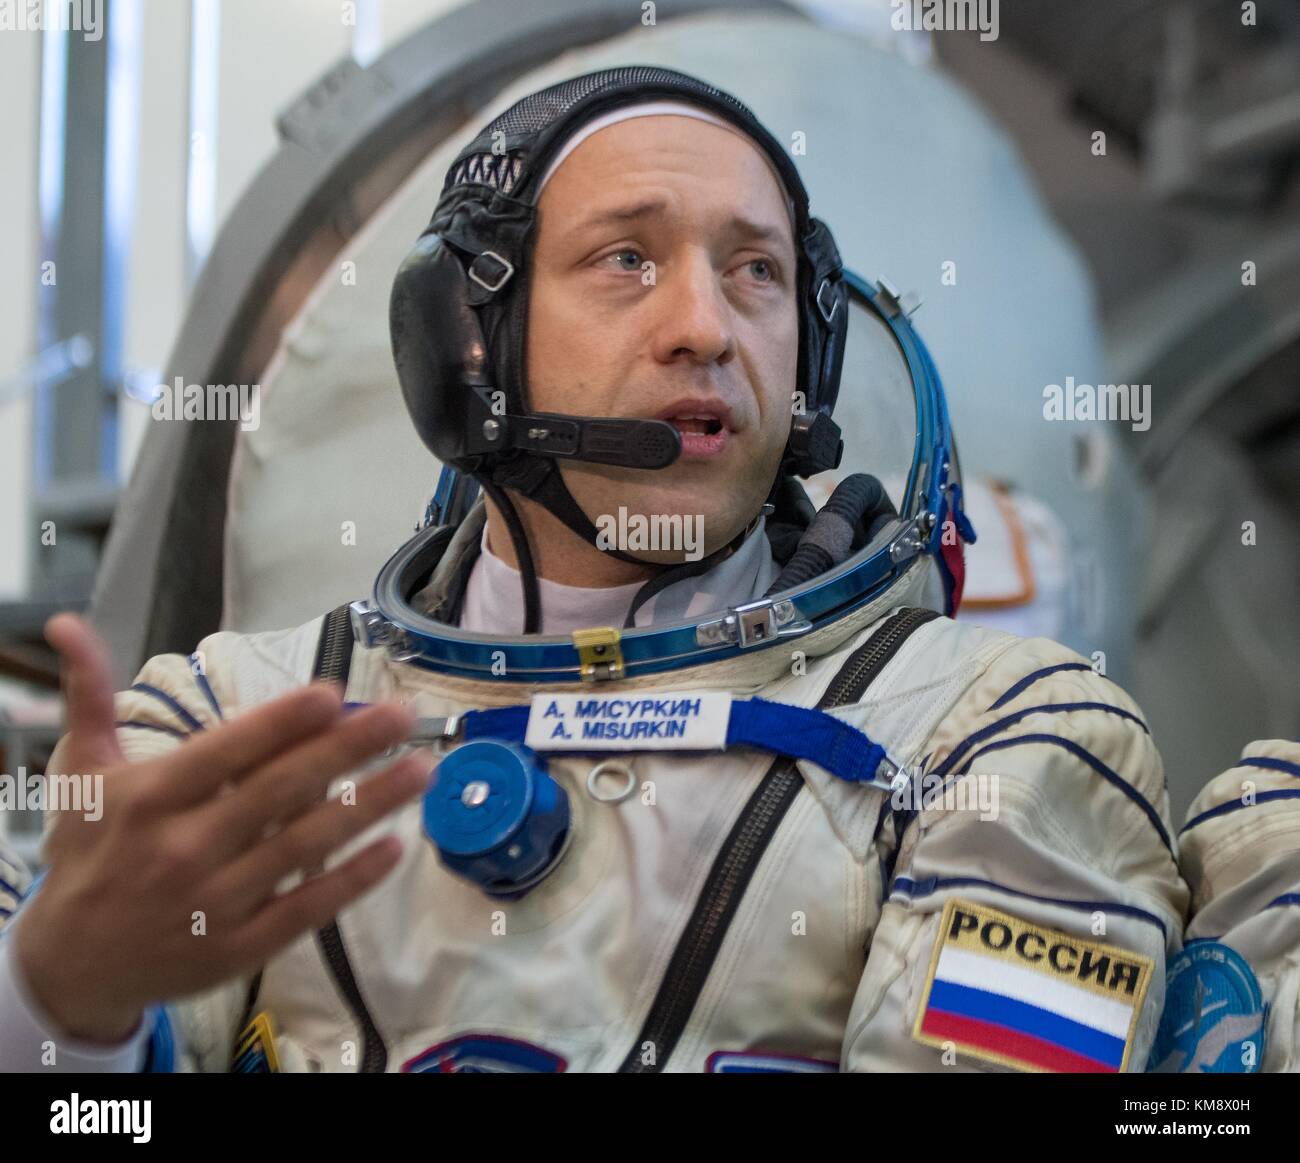 NASA International Space Station (ISS) Expedition 53 prime crew member Russian cosmonaut Alexander Misurkin of Roscosmos prepares for his Soyuz qualification exams outside the Soyuz simulator prior to the Soyuz MS-06 spacecraft launch at the Gagarin Cosmonaut Training Center August 31, 2017 in Star City, Russia.   (photo by Bill Ingalls via Planetpix) Stock Photo